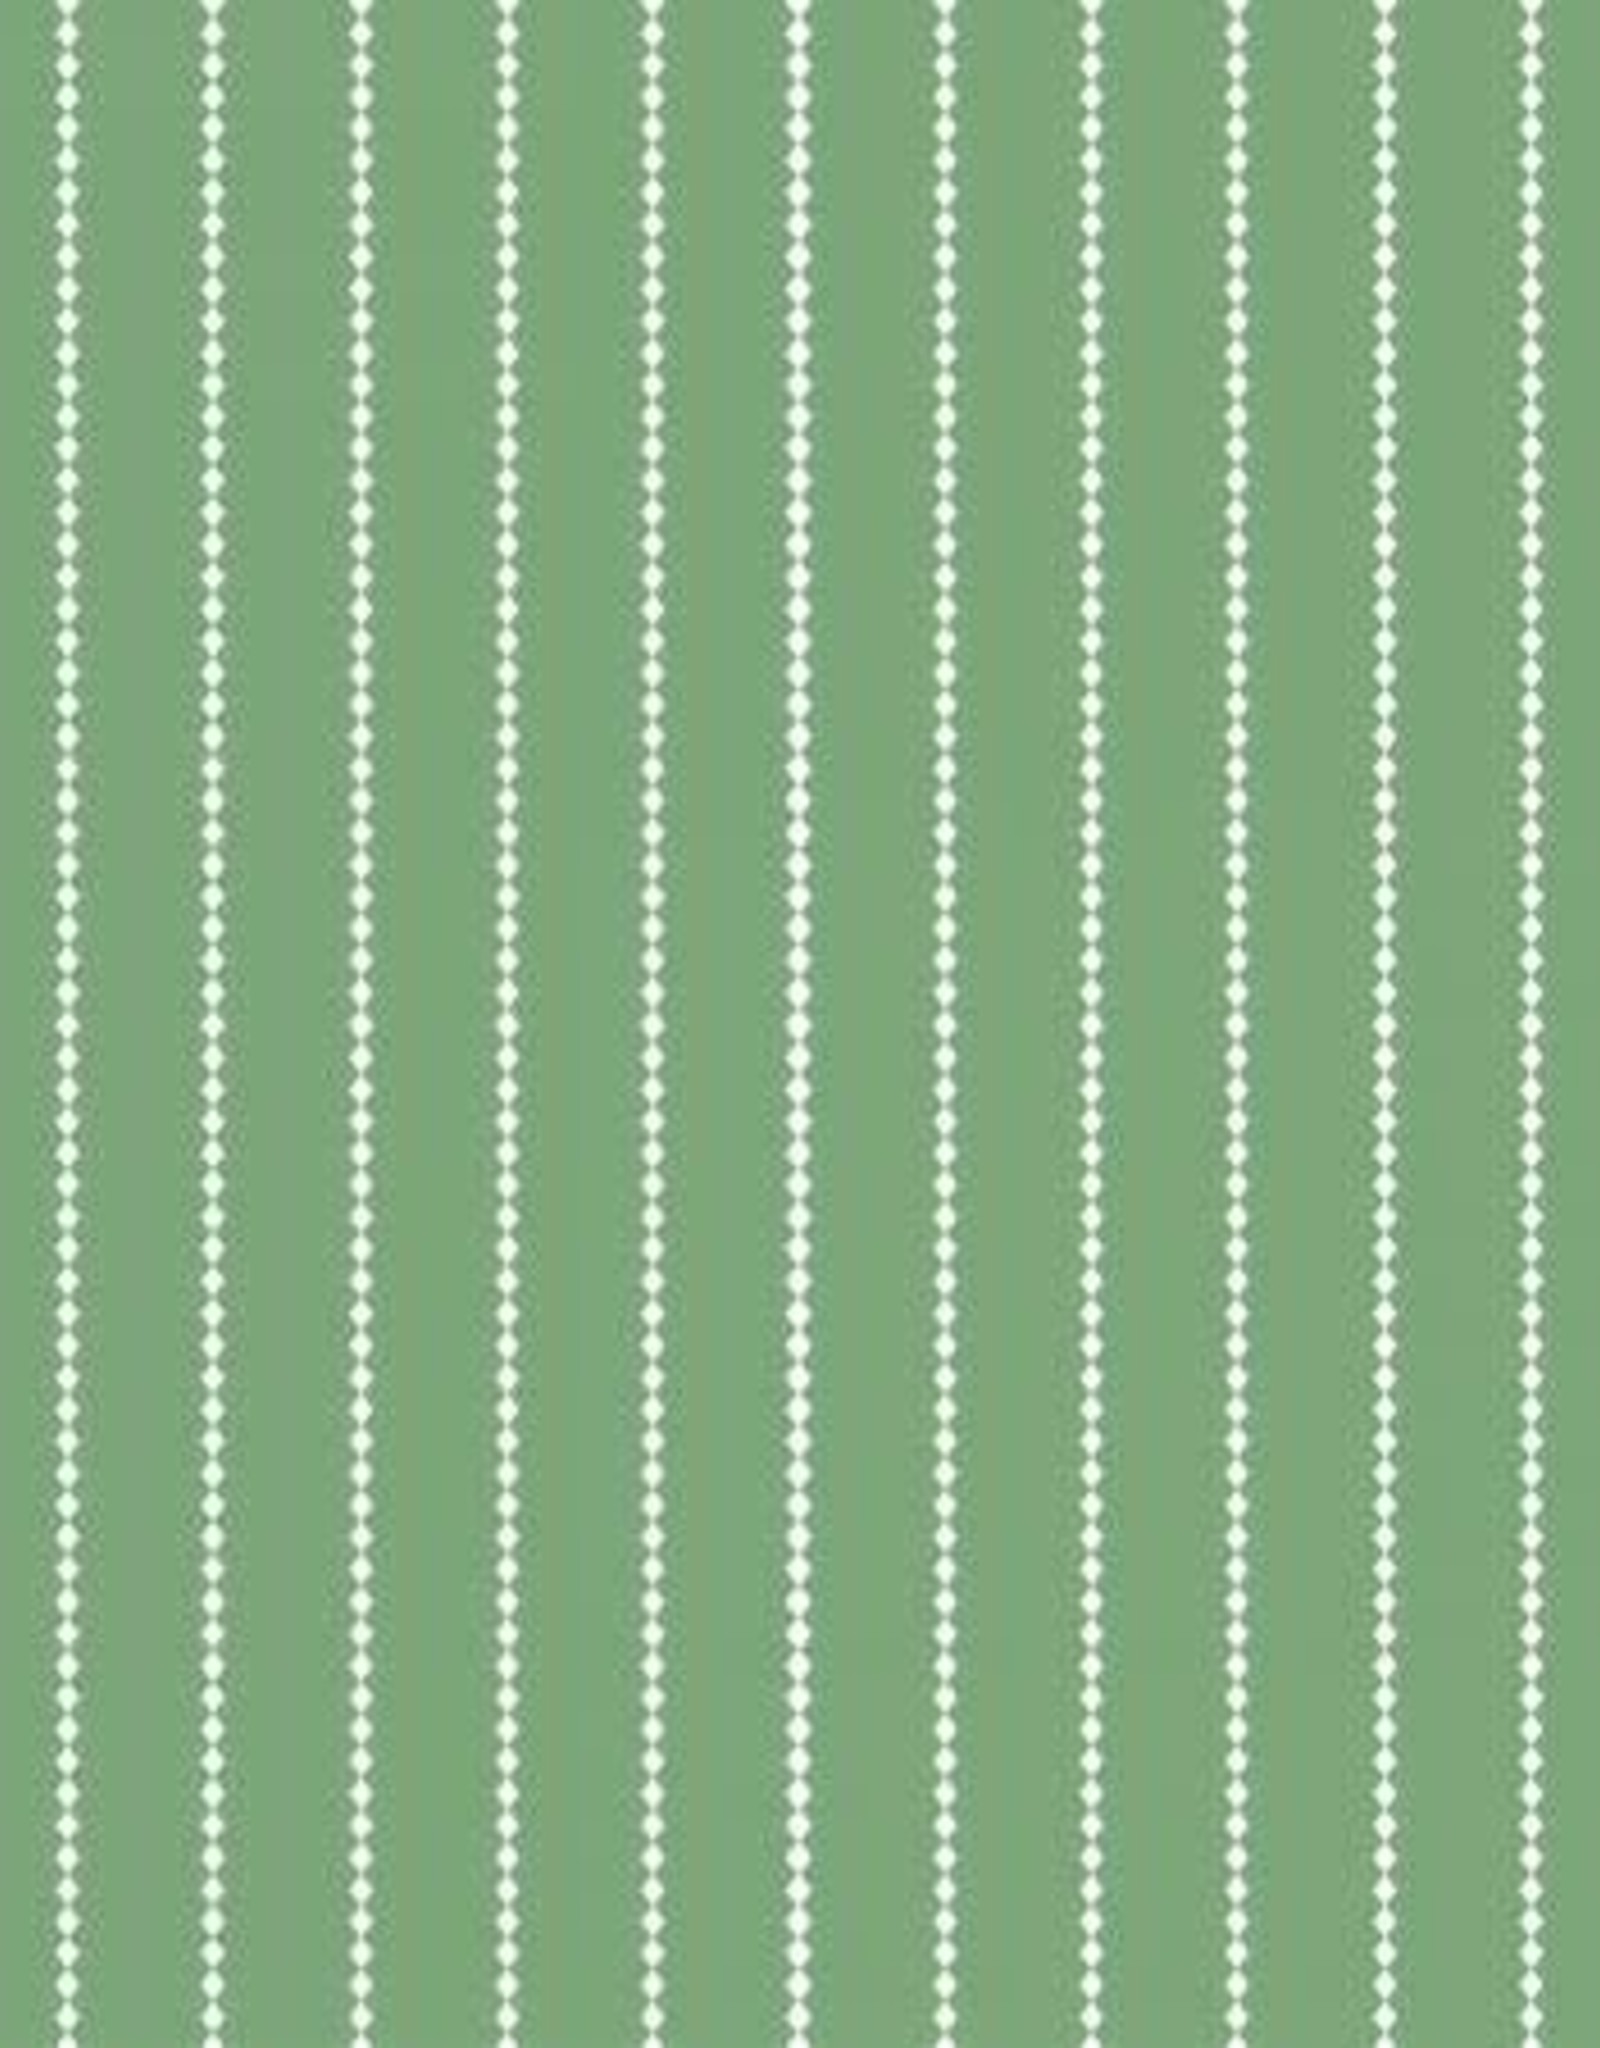 Poppy and Posey Stripes Green (1/2m)- C10583R-GREEN